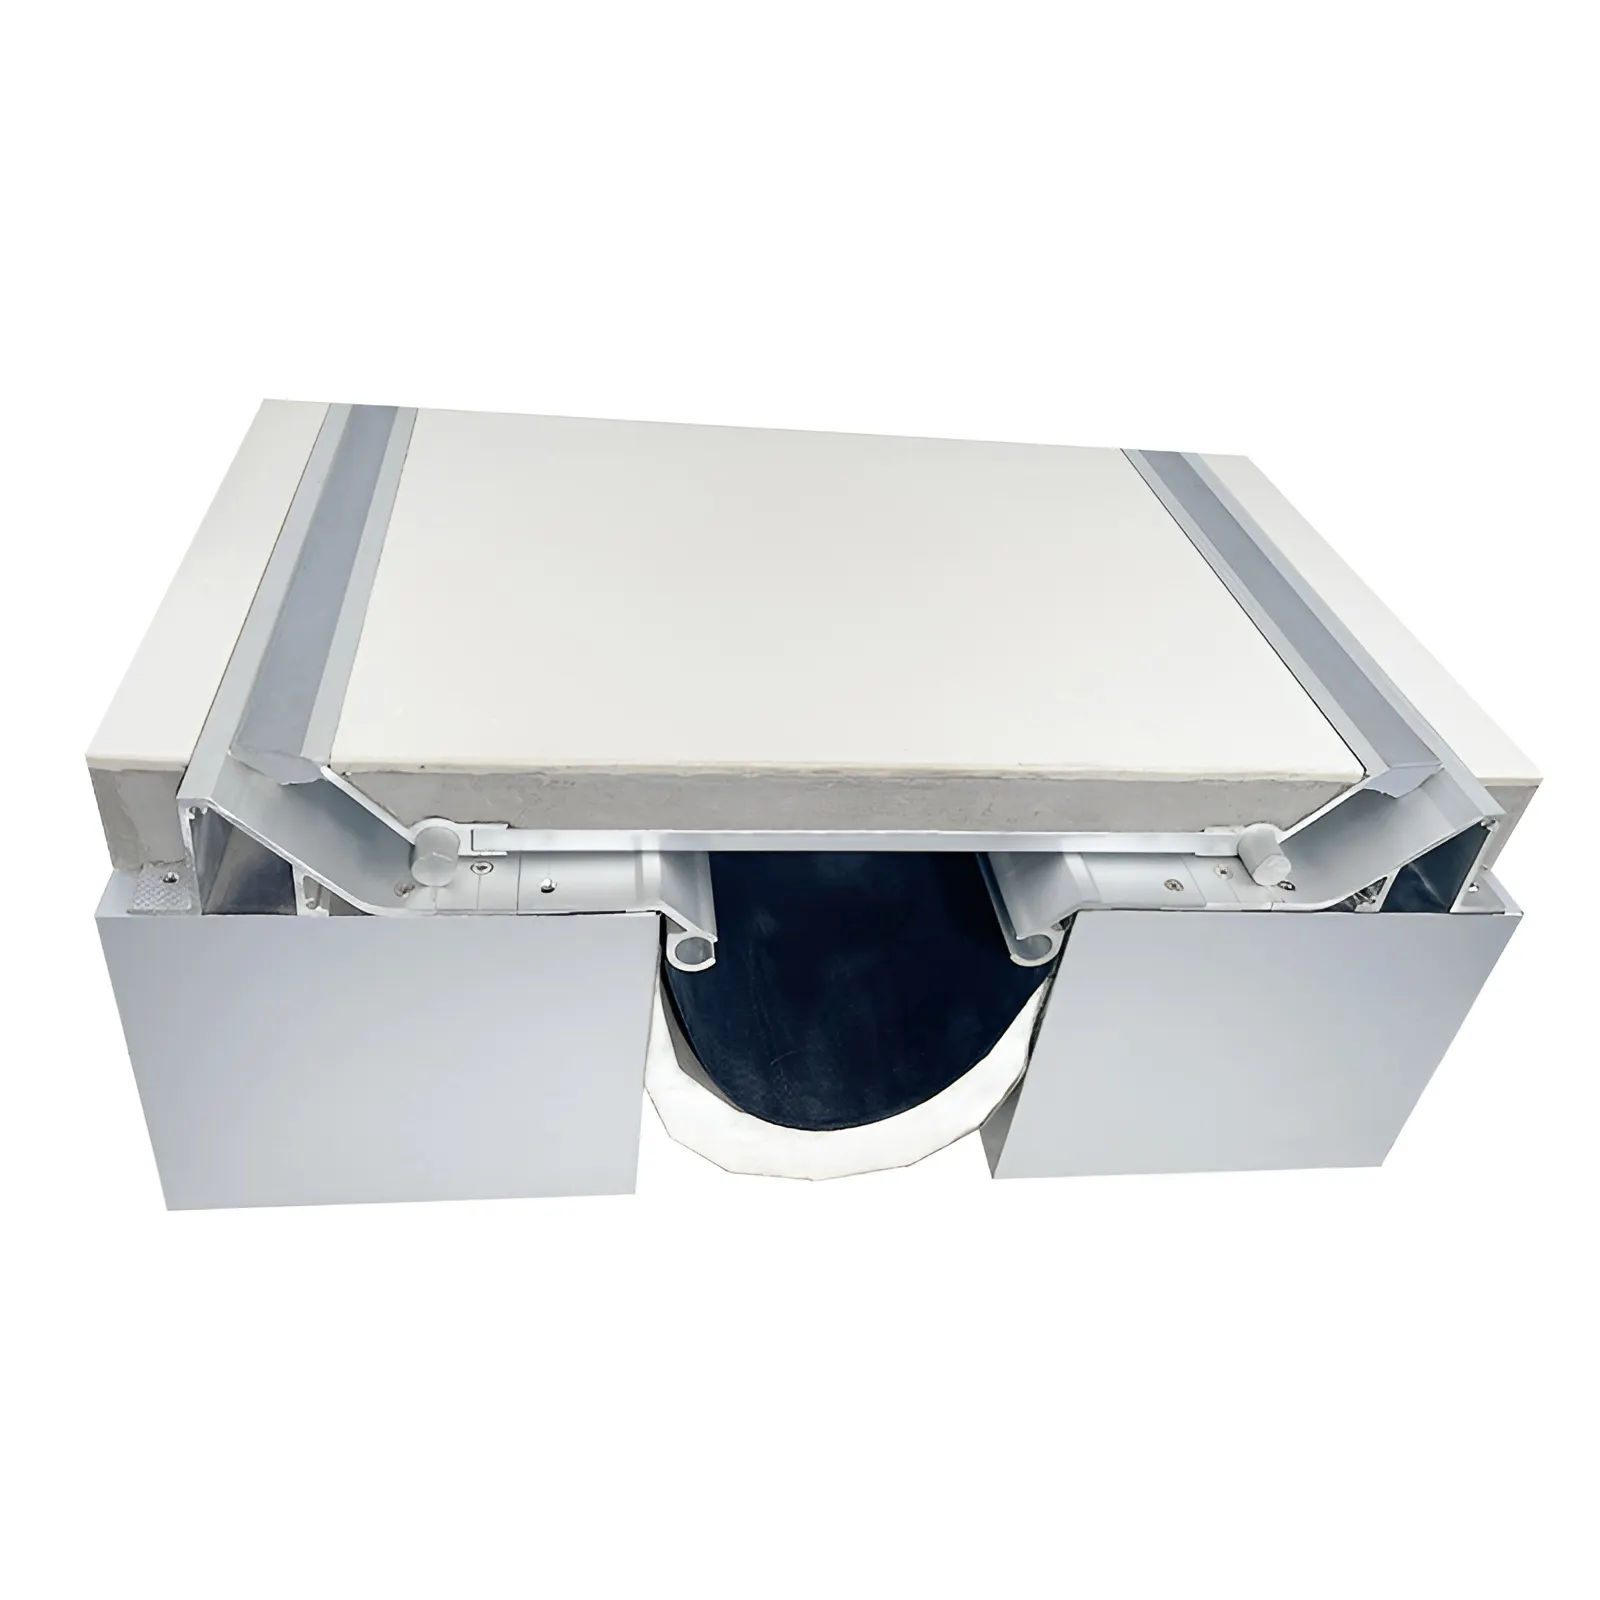 Modular Pan System Recessed Aluminum Floor Expansion Joint Cover Seismic Concrete Expansion Joint